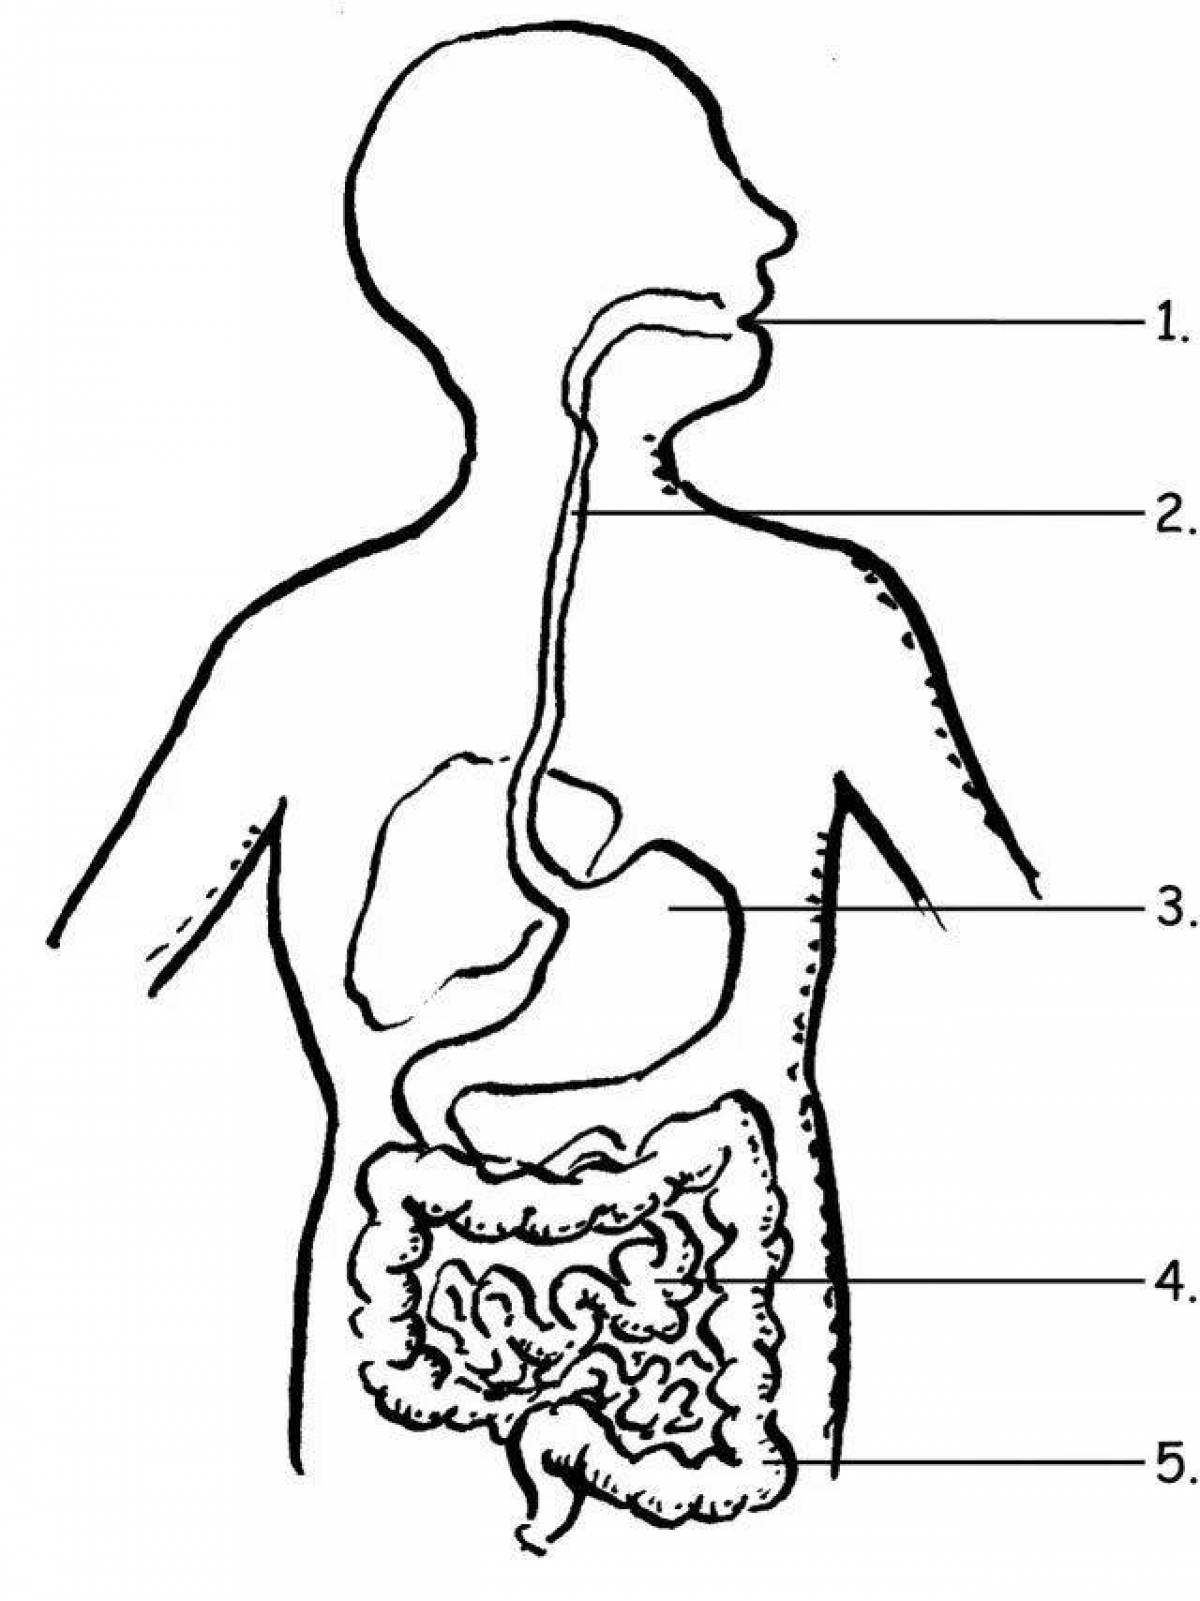 Lovely digestive system coloring page